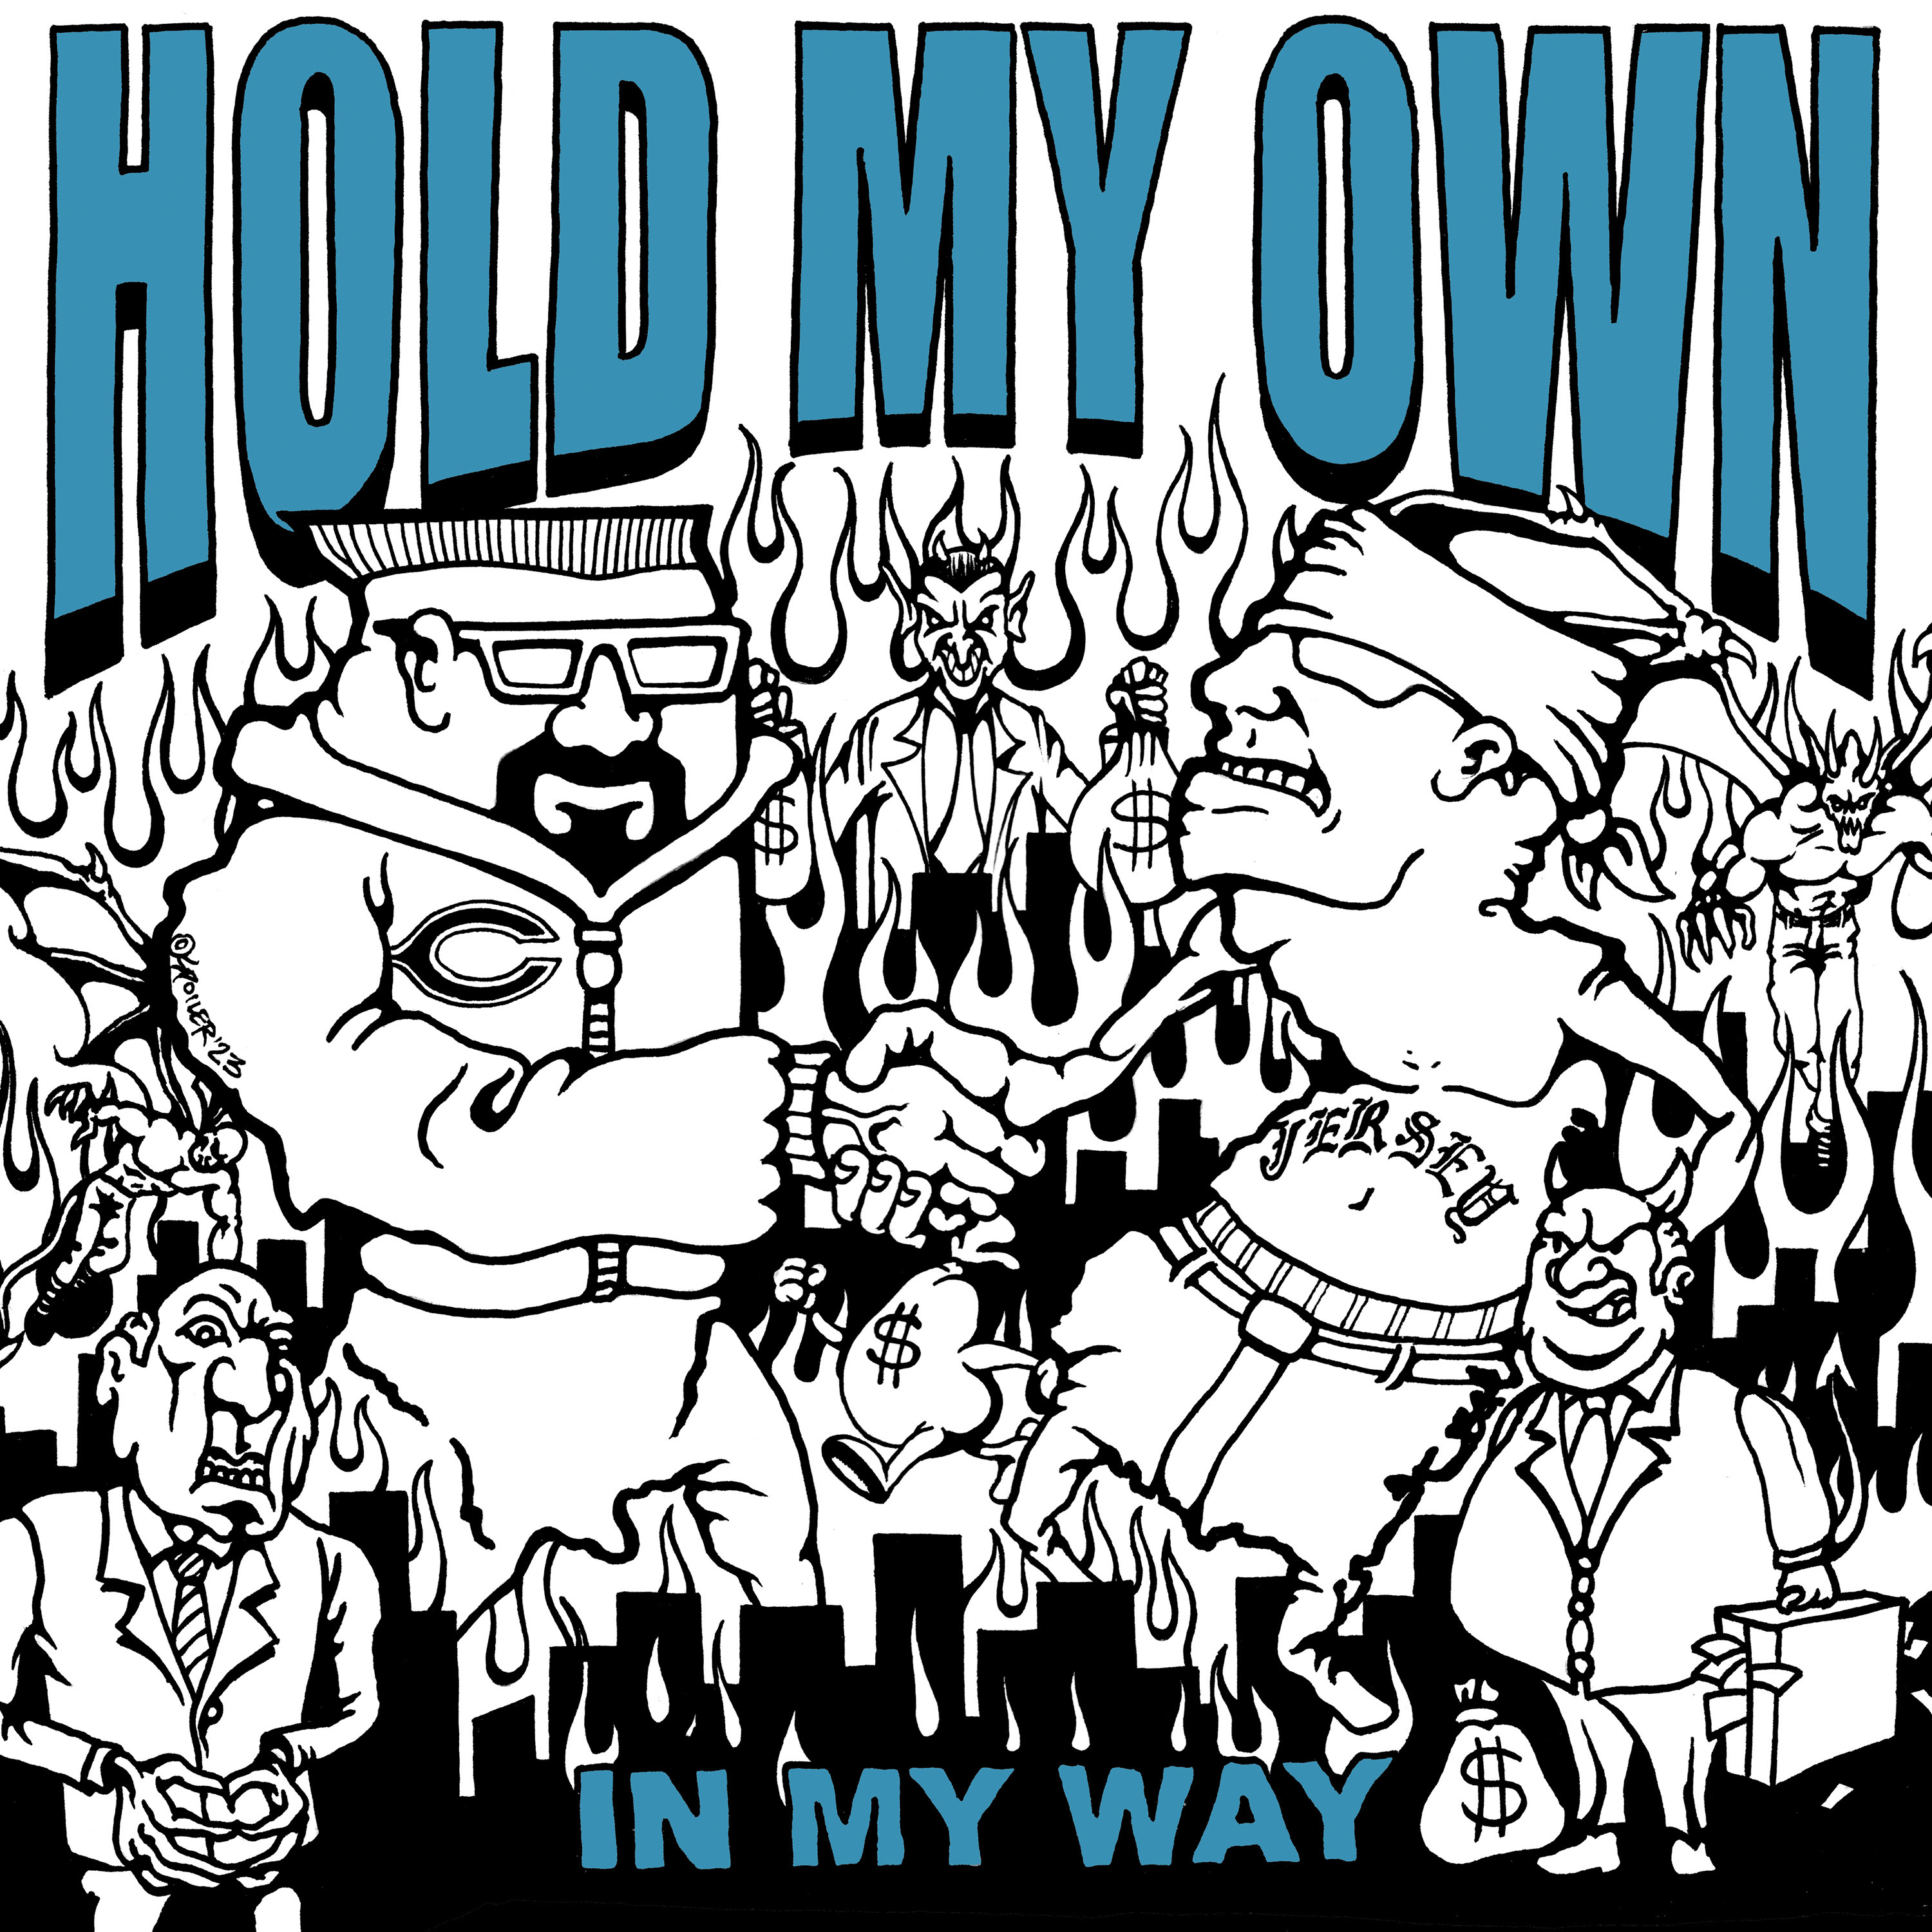 HOLD MY OWN ‘IN MY WAY’